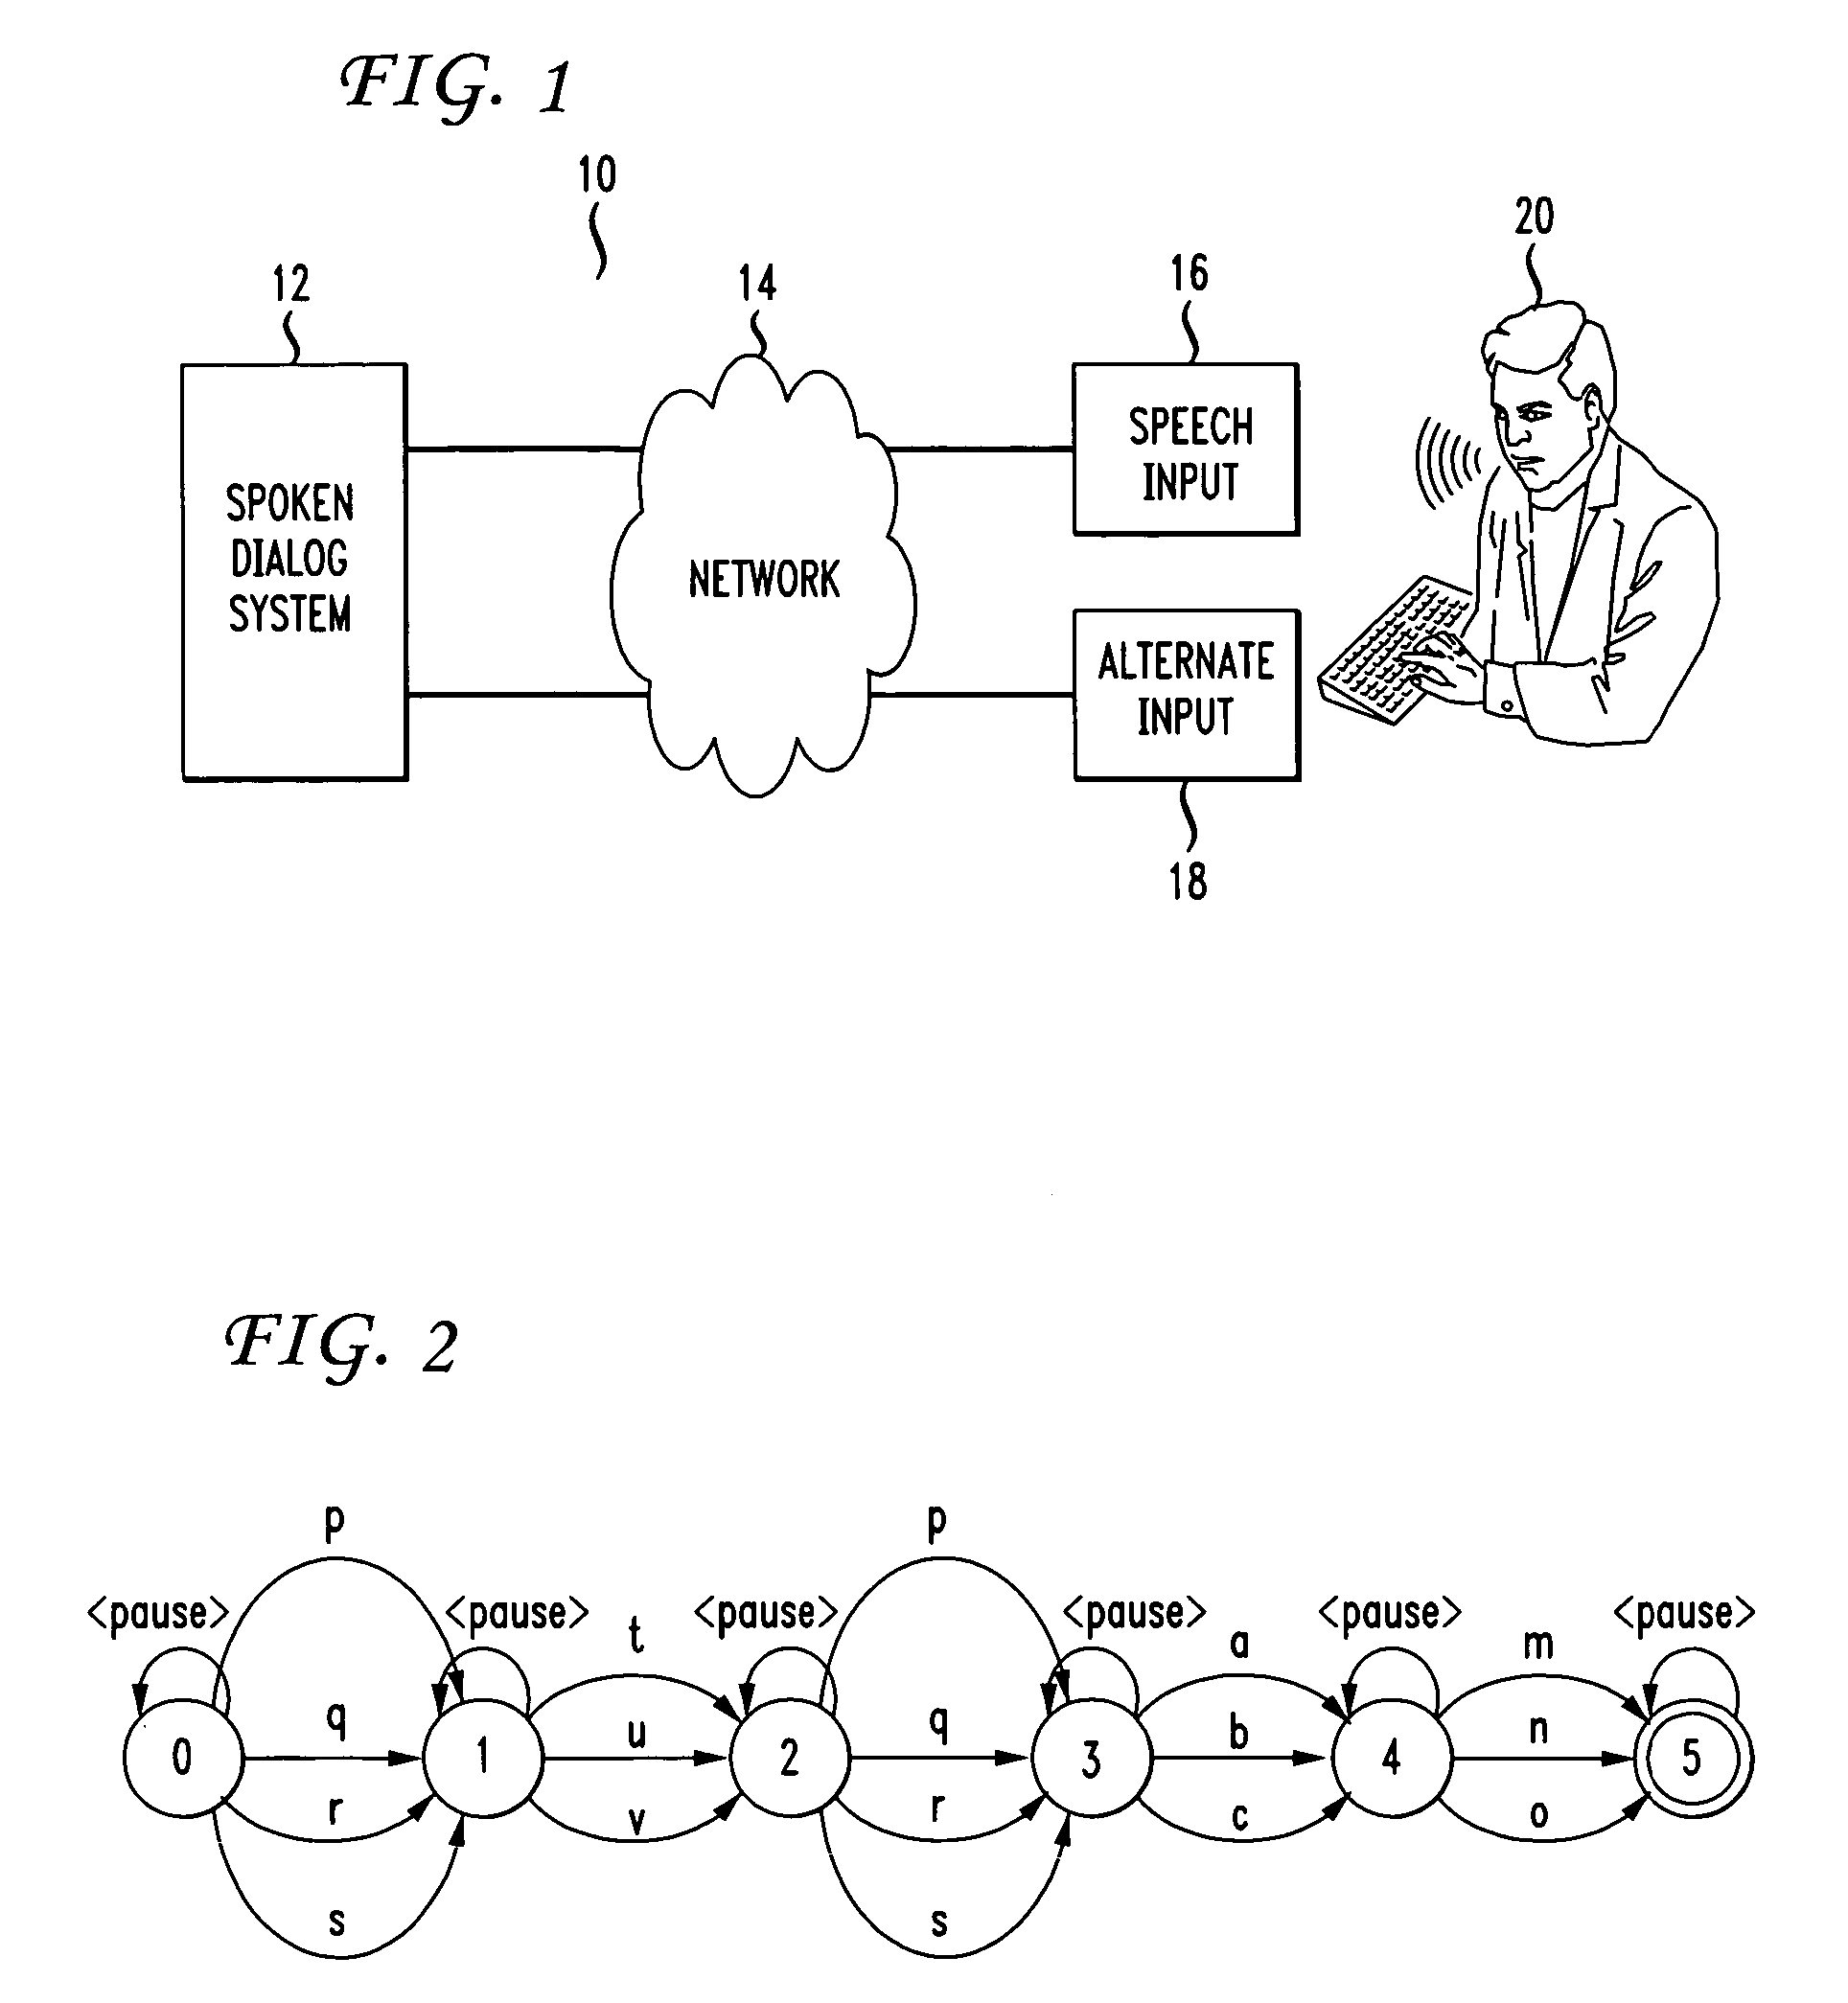 System and method for spelling recognition using speech and non-speech input